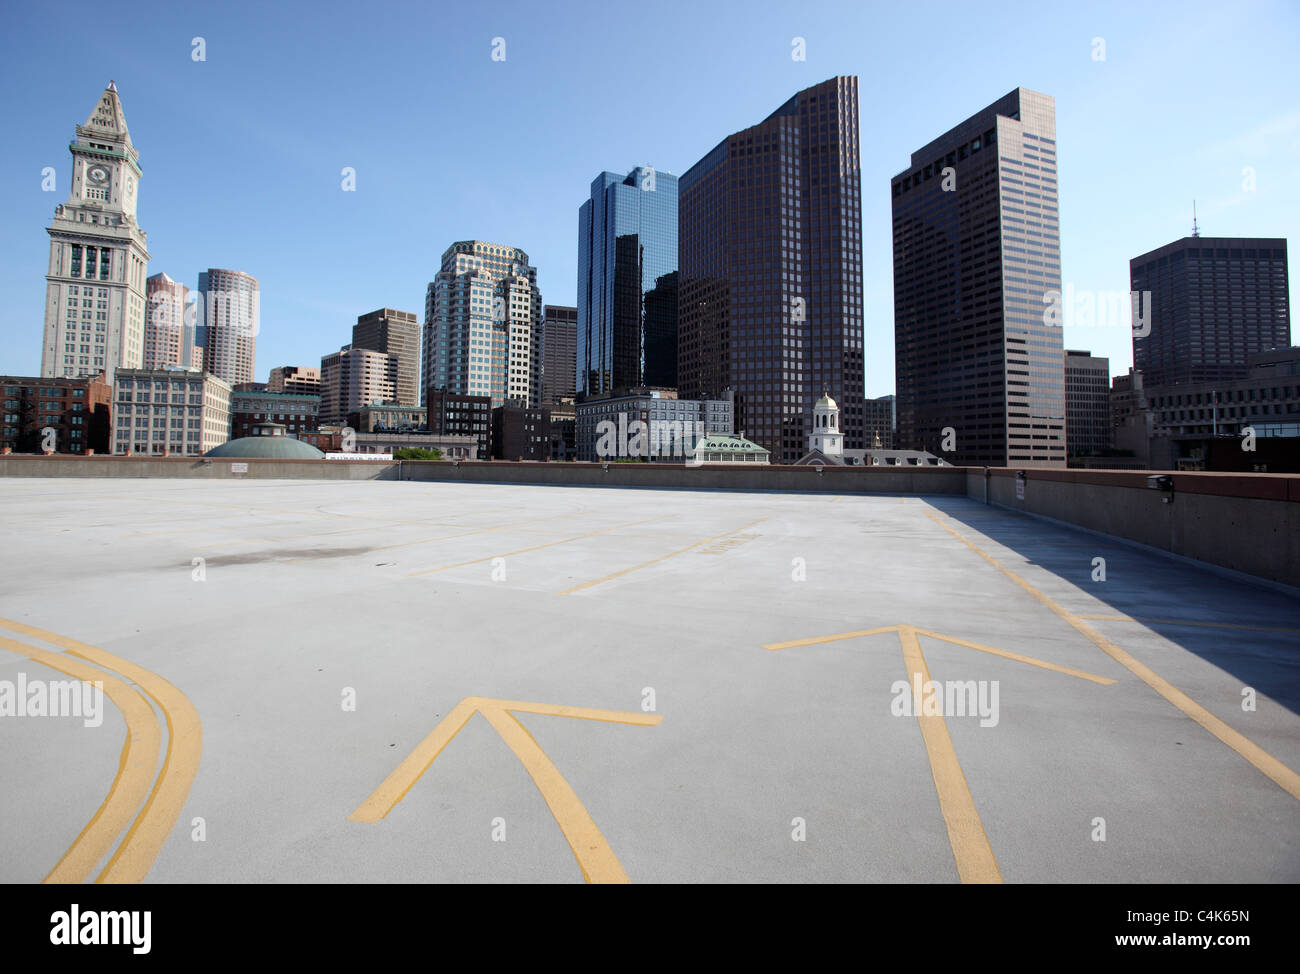 Roof of a parking garage and the Boston skyline Stock Photo